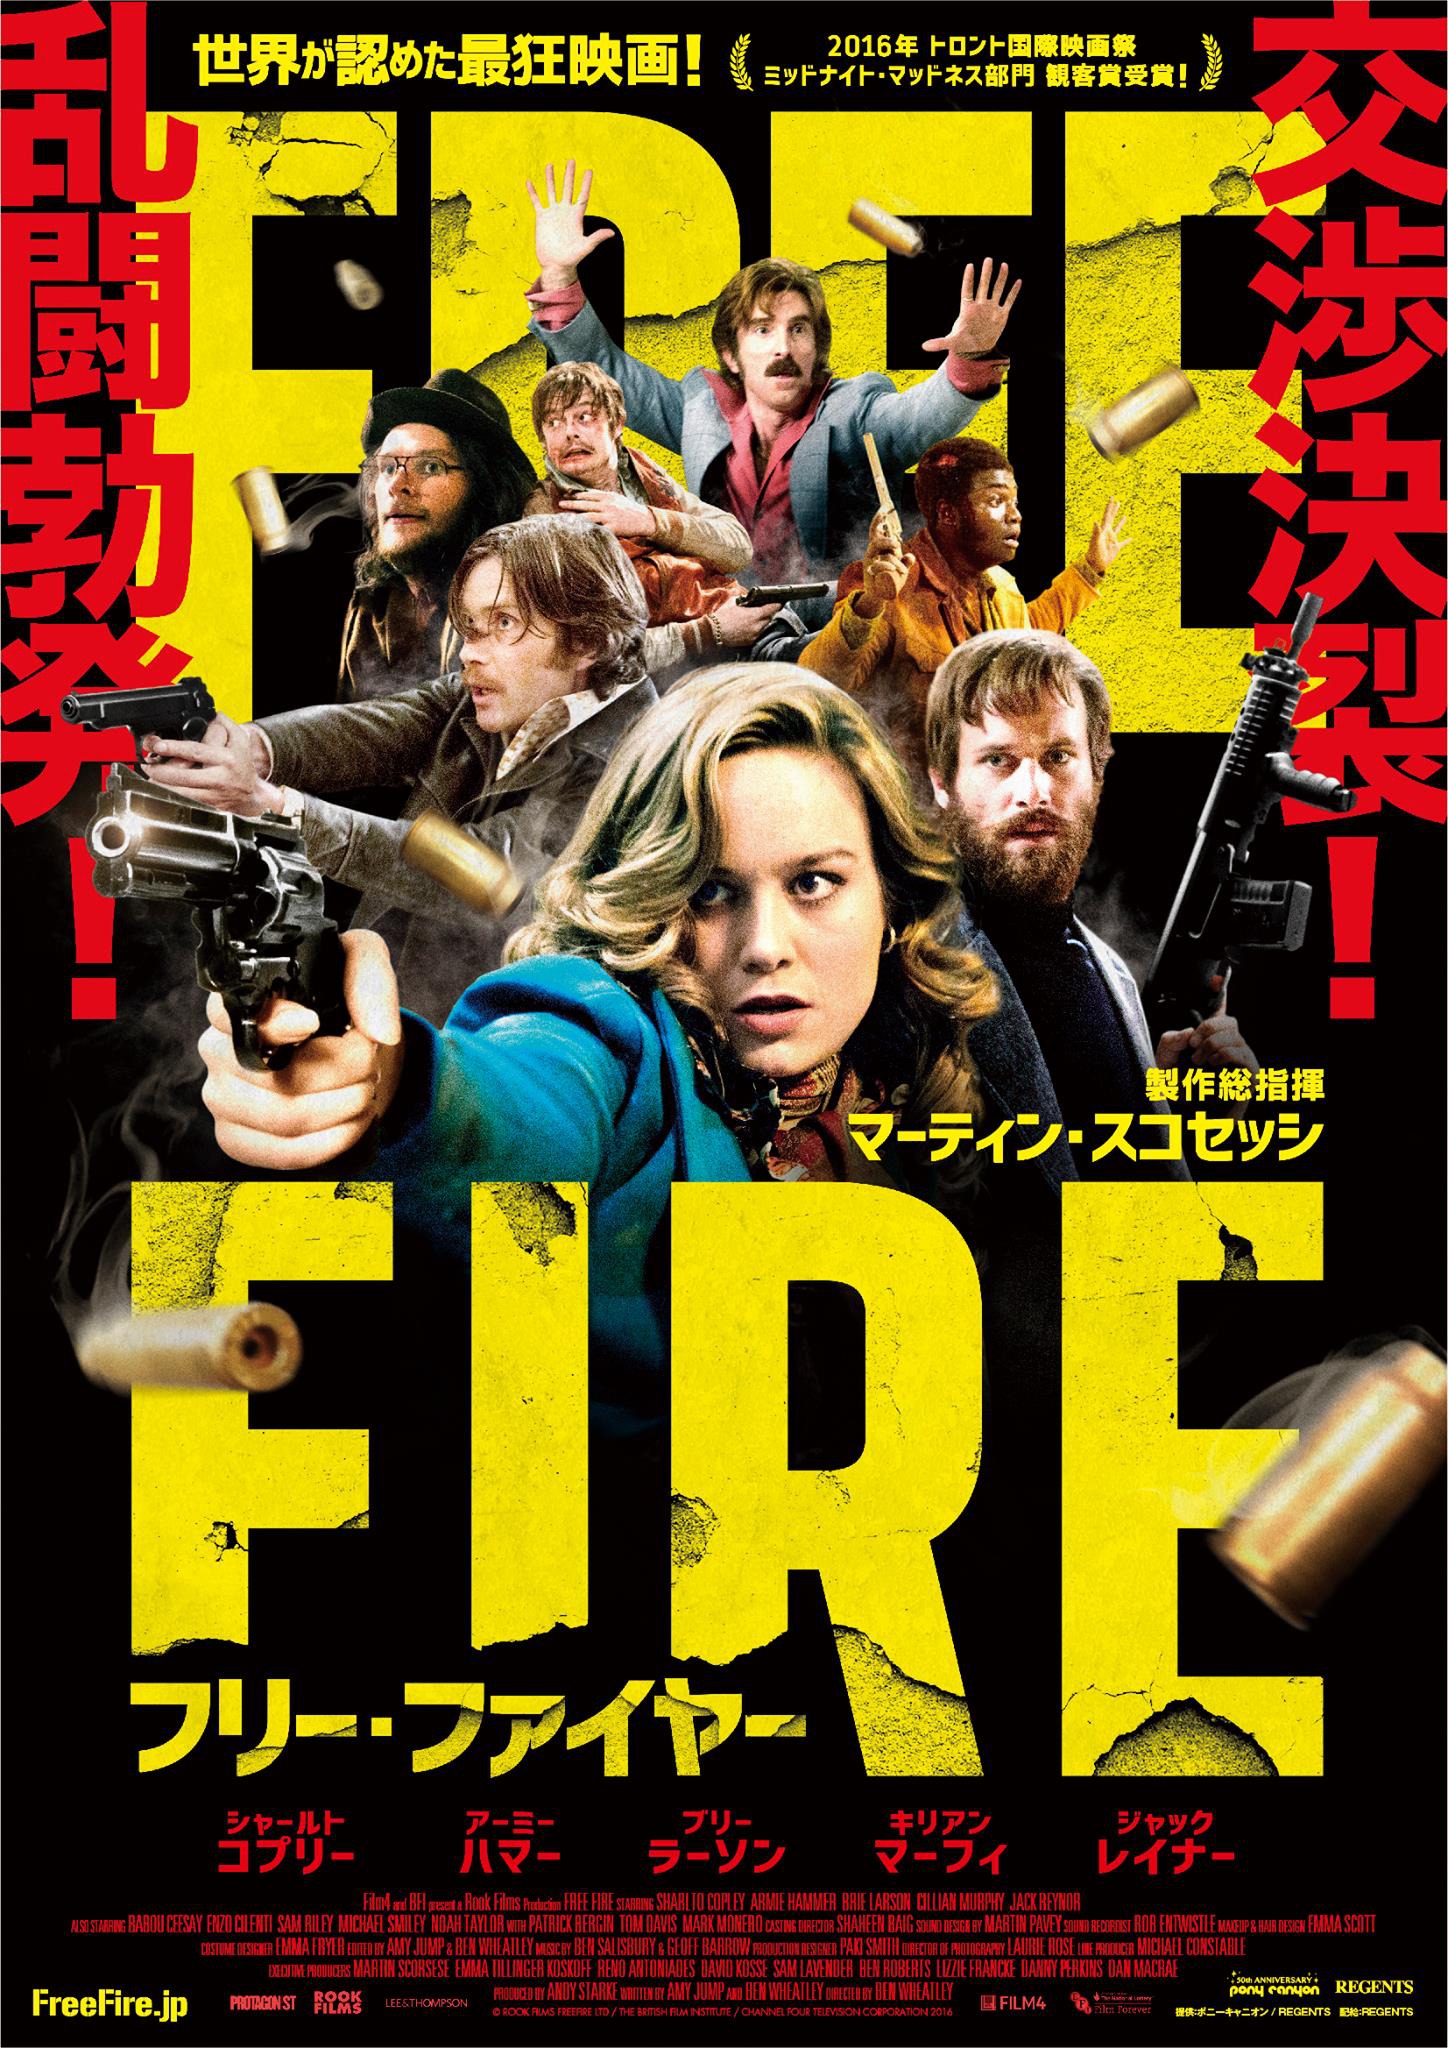 Mega Sized Movie Poster Image for Free Fire (#14 of 28)